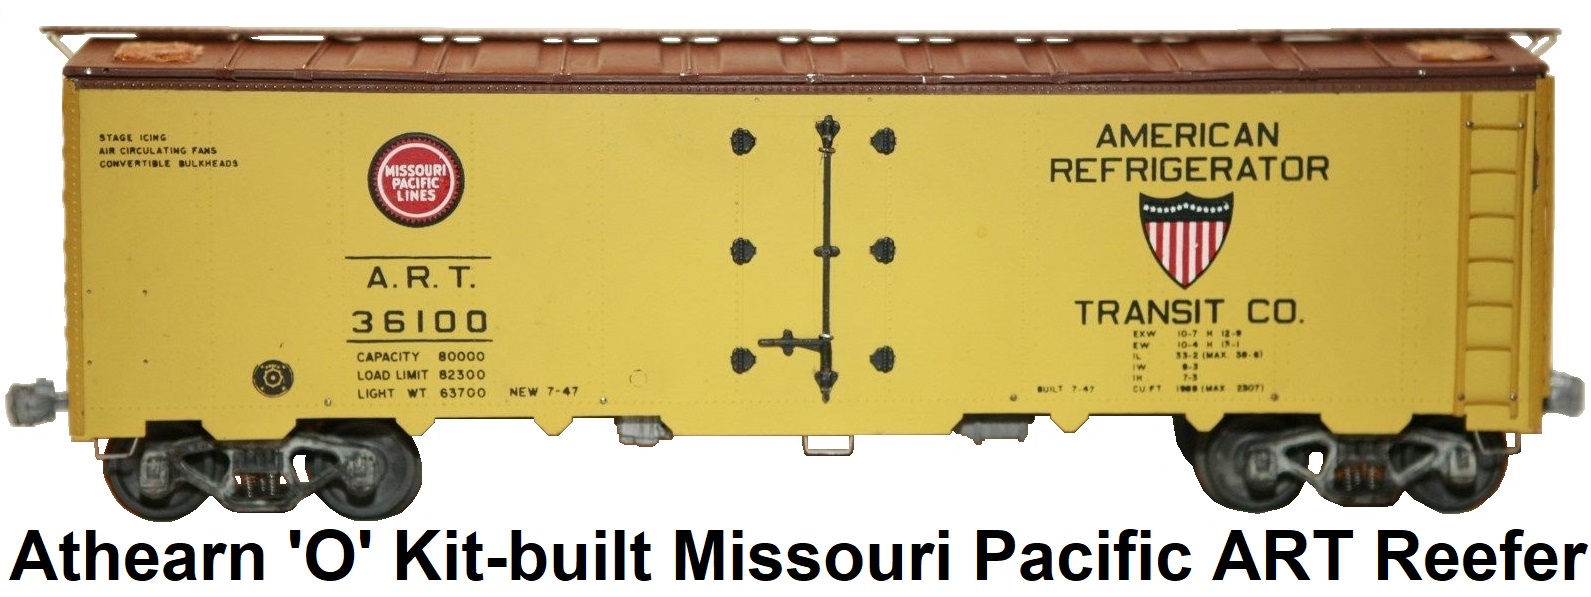 Athearn 'O' scale Kit-built 2-rail Missouri Pacific Lines American Refrigerator Transit Co. ART Reefer Road #36100 Catalog #A405